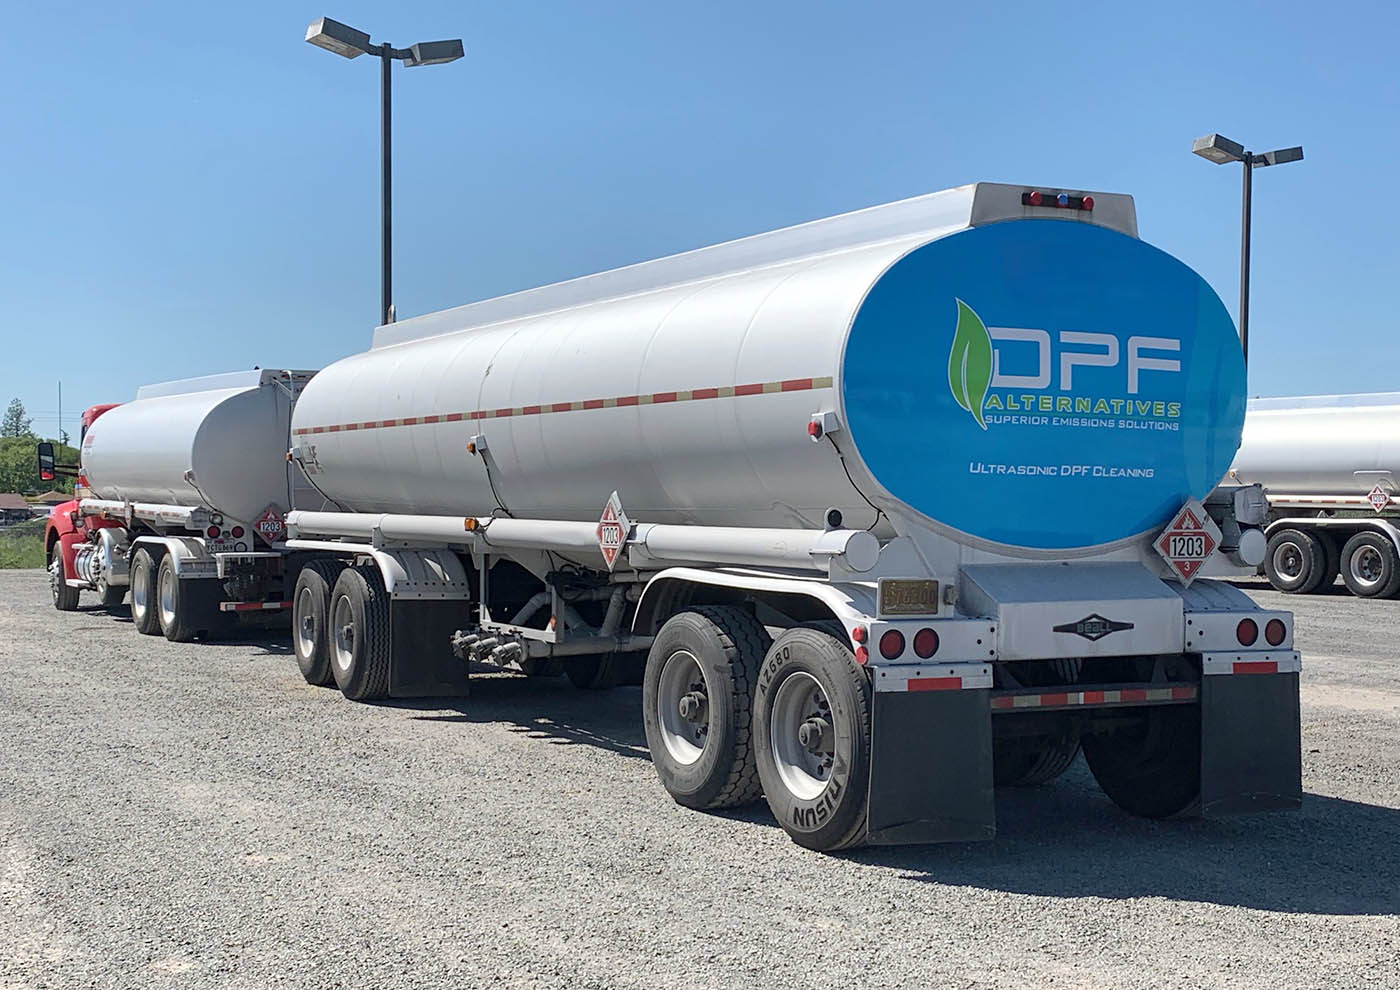 Back of a clean, large, reflective semi truck rig, contact DPF Alternatives for a DPF cleaning in Houston, TX.